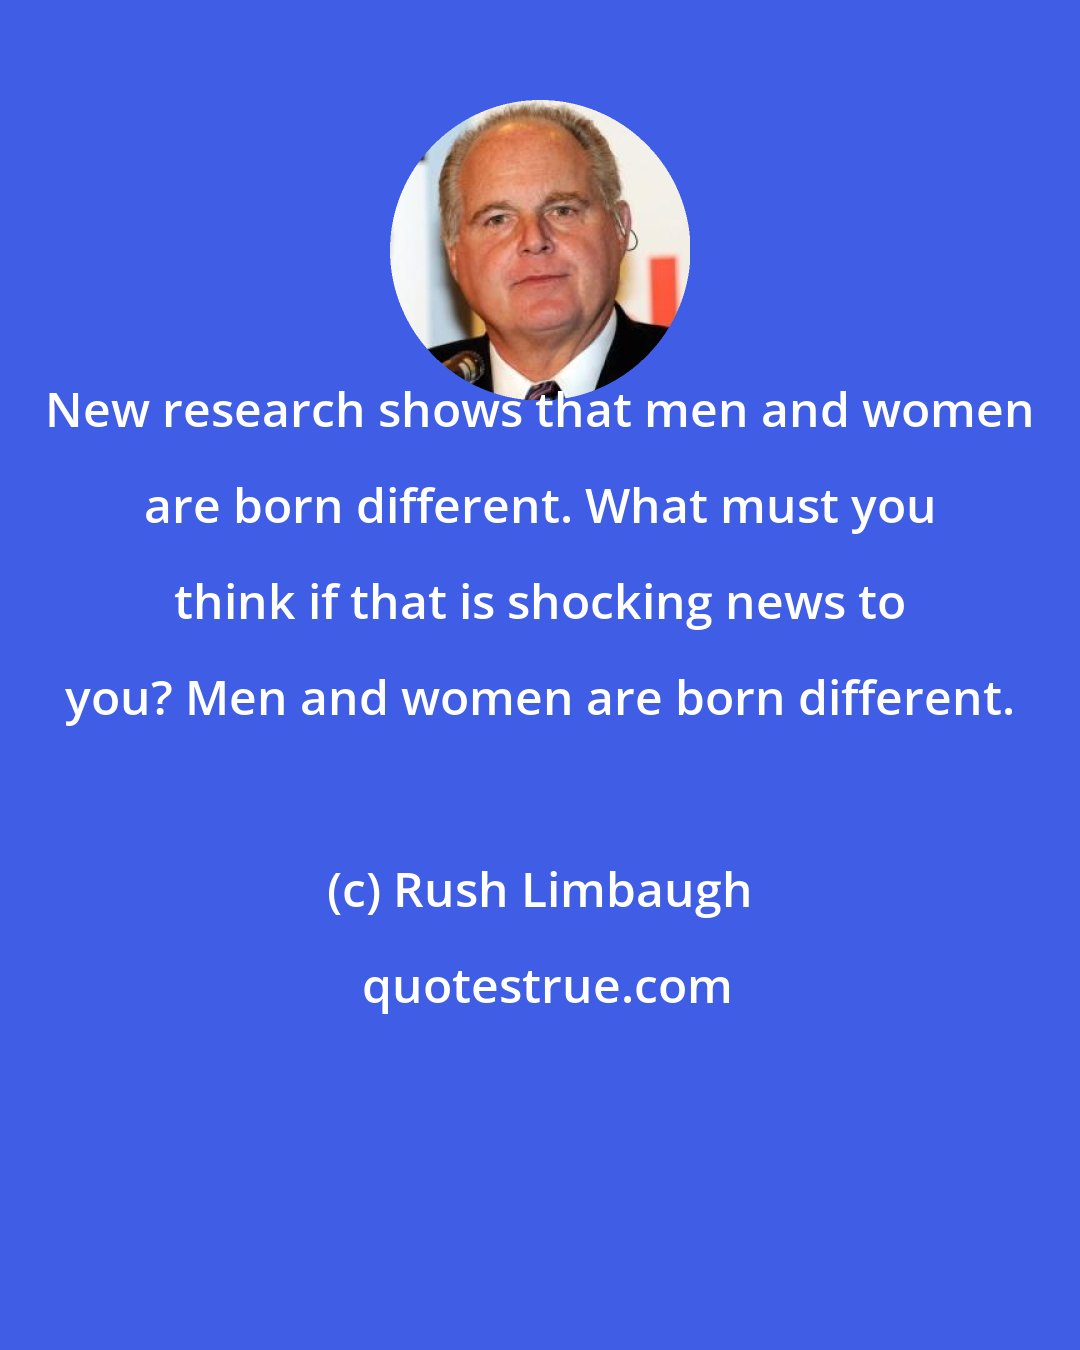 Rush Limbaugh: New research shows that men and women are born different. What must you think if that is shocking news to you? Men and women are born different.